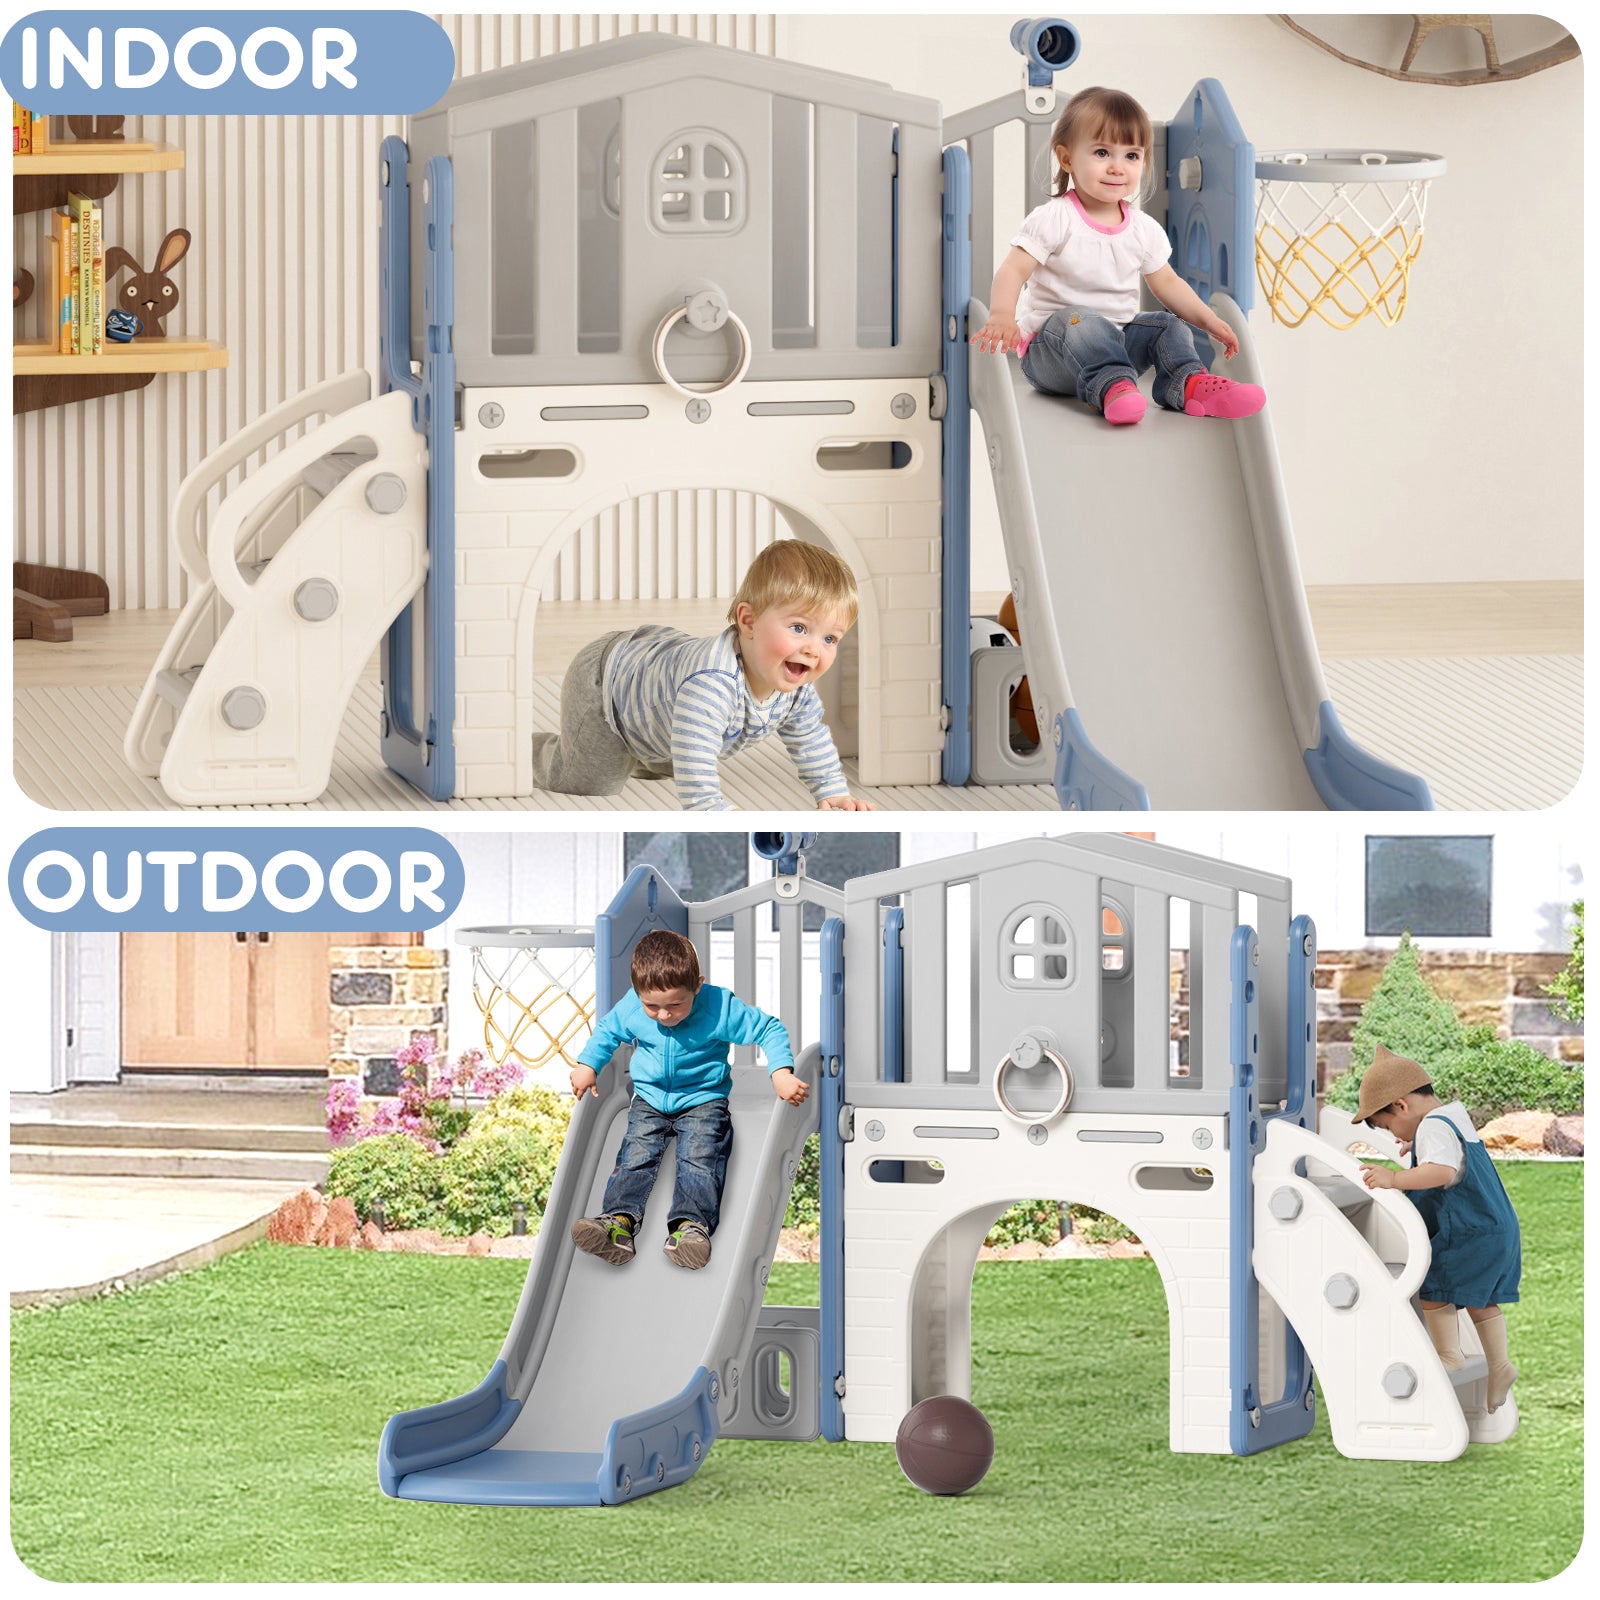 XJD 8 in 1 Toddler Slide Set  Climber Slide for Age 1-3, Outdoor Indoor Playset with Basketball Hoop, Telescope, and Storage Space, Coffee/Beige